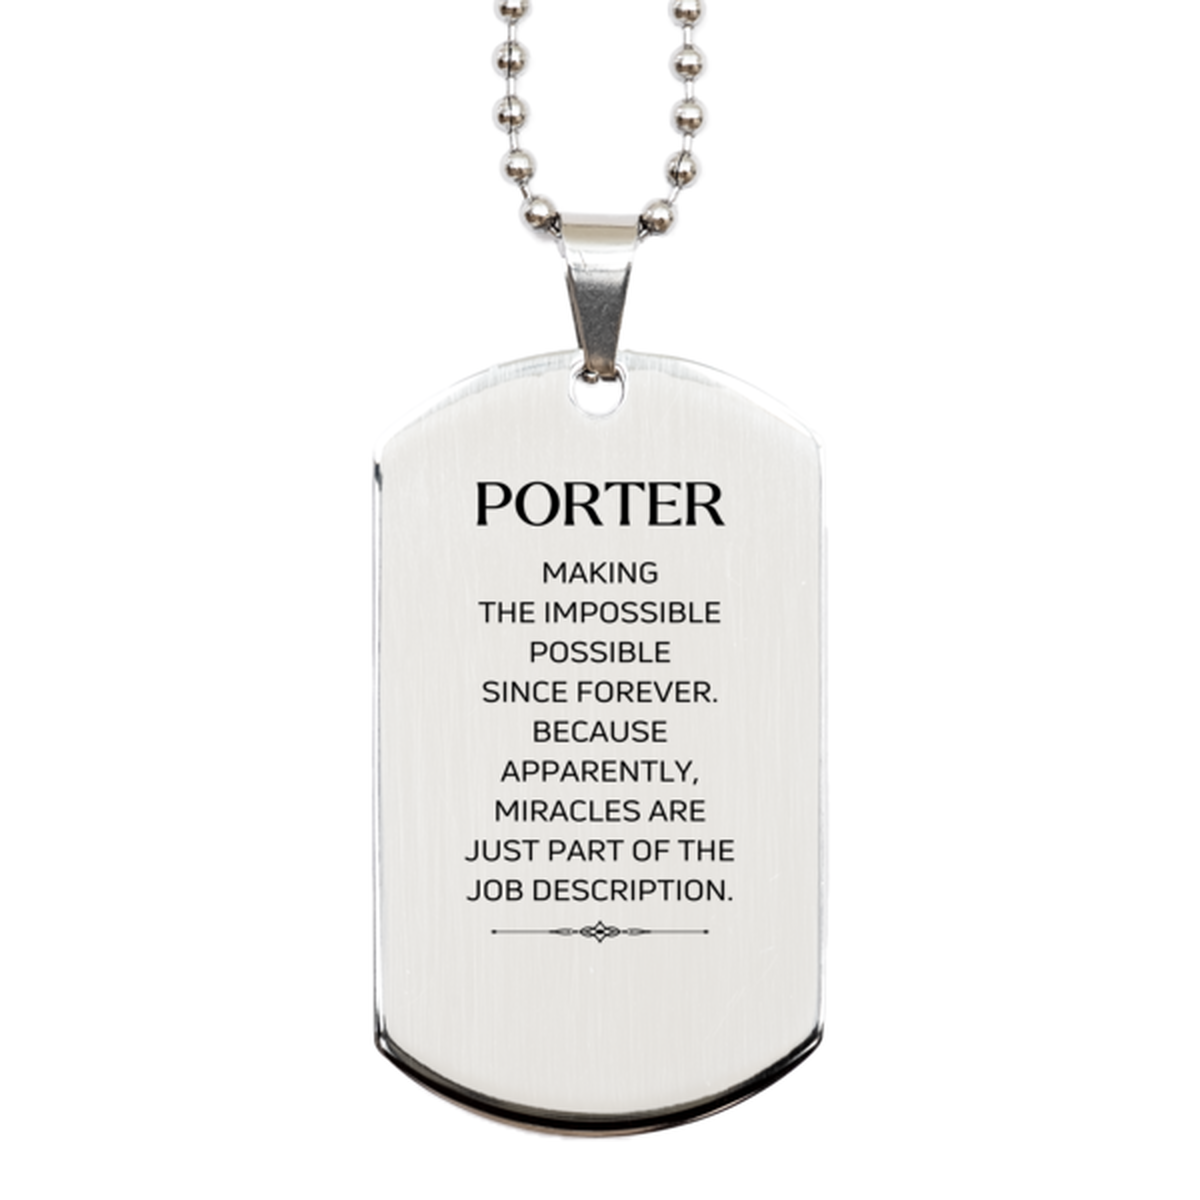 Funny Porter Gifts, Miracles are just part of the job description, Inspirational Birthday Silver Dog Tag For Porter, Men, Women, Coworkers, Friends, Boss